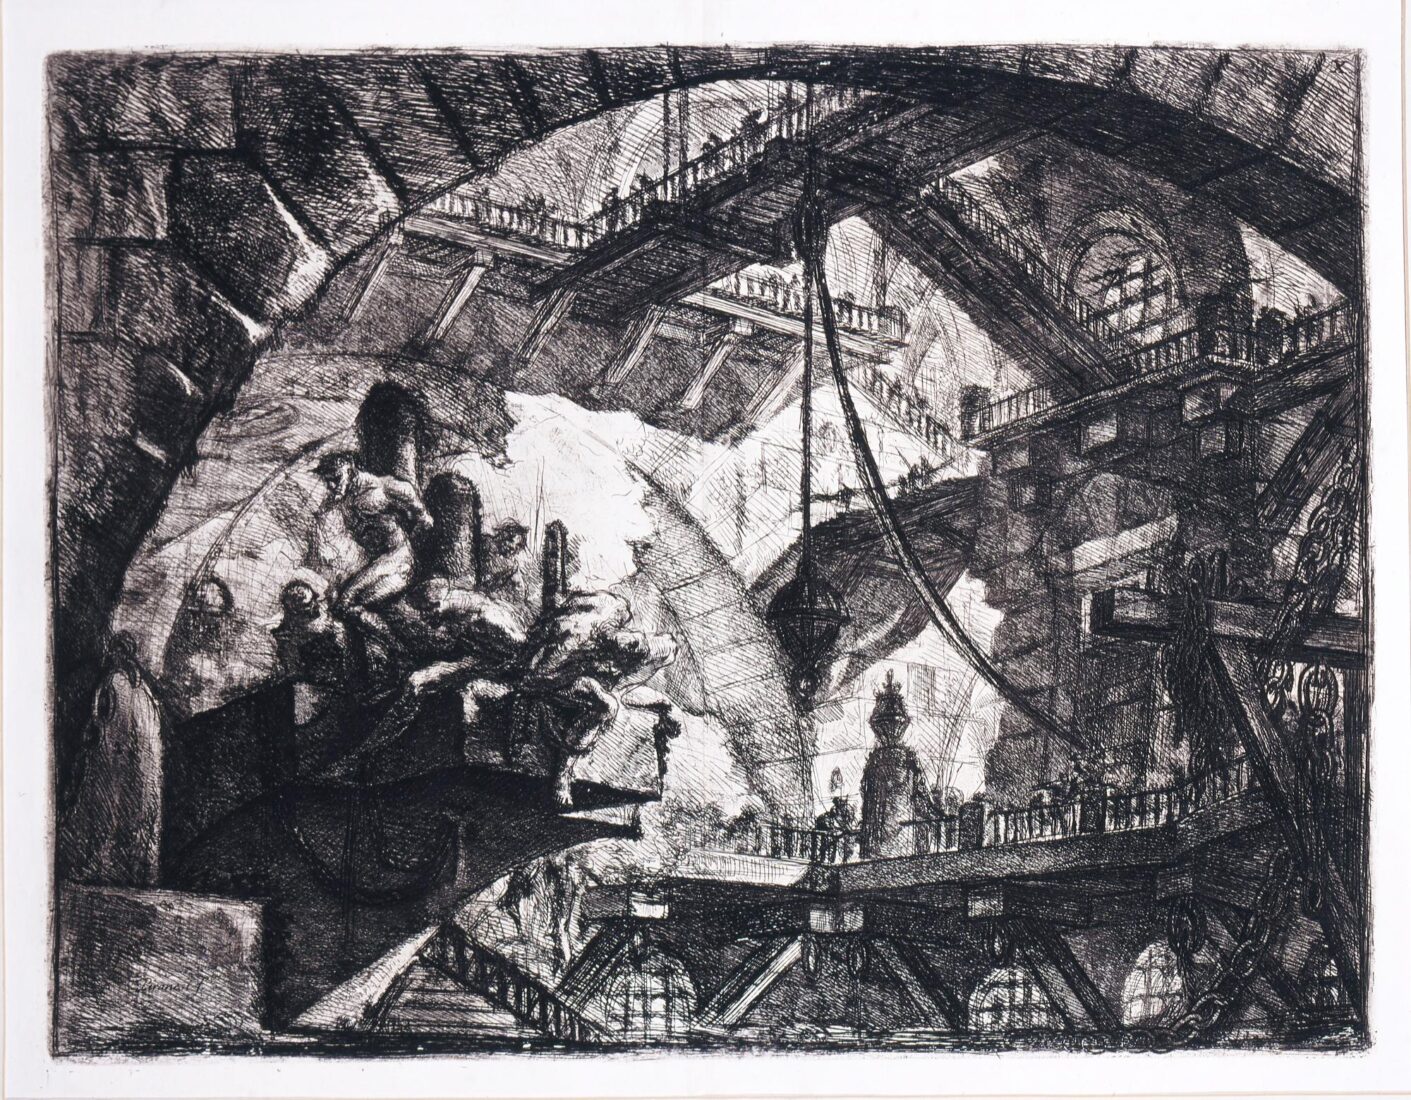 Prisoners on a projecting platform, from the series “Prisons of the Imagination” - Piranesi Giambattista